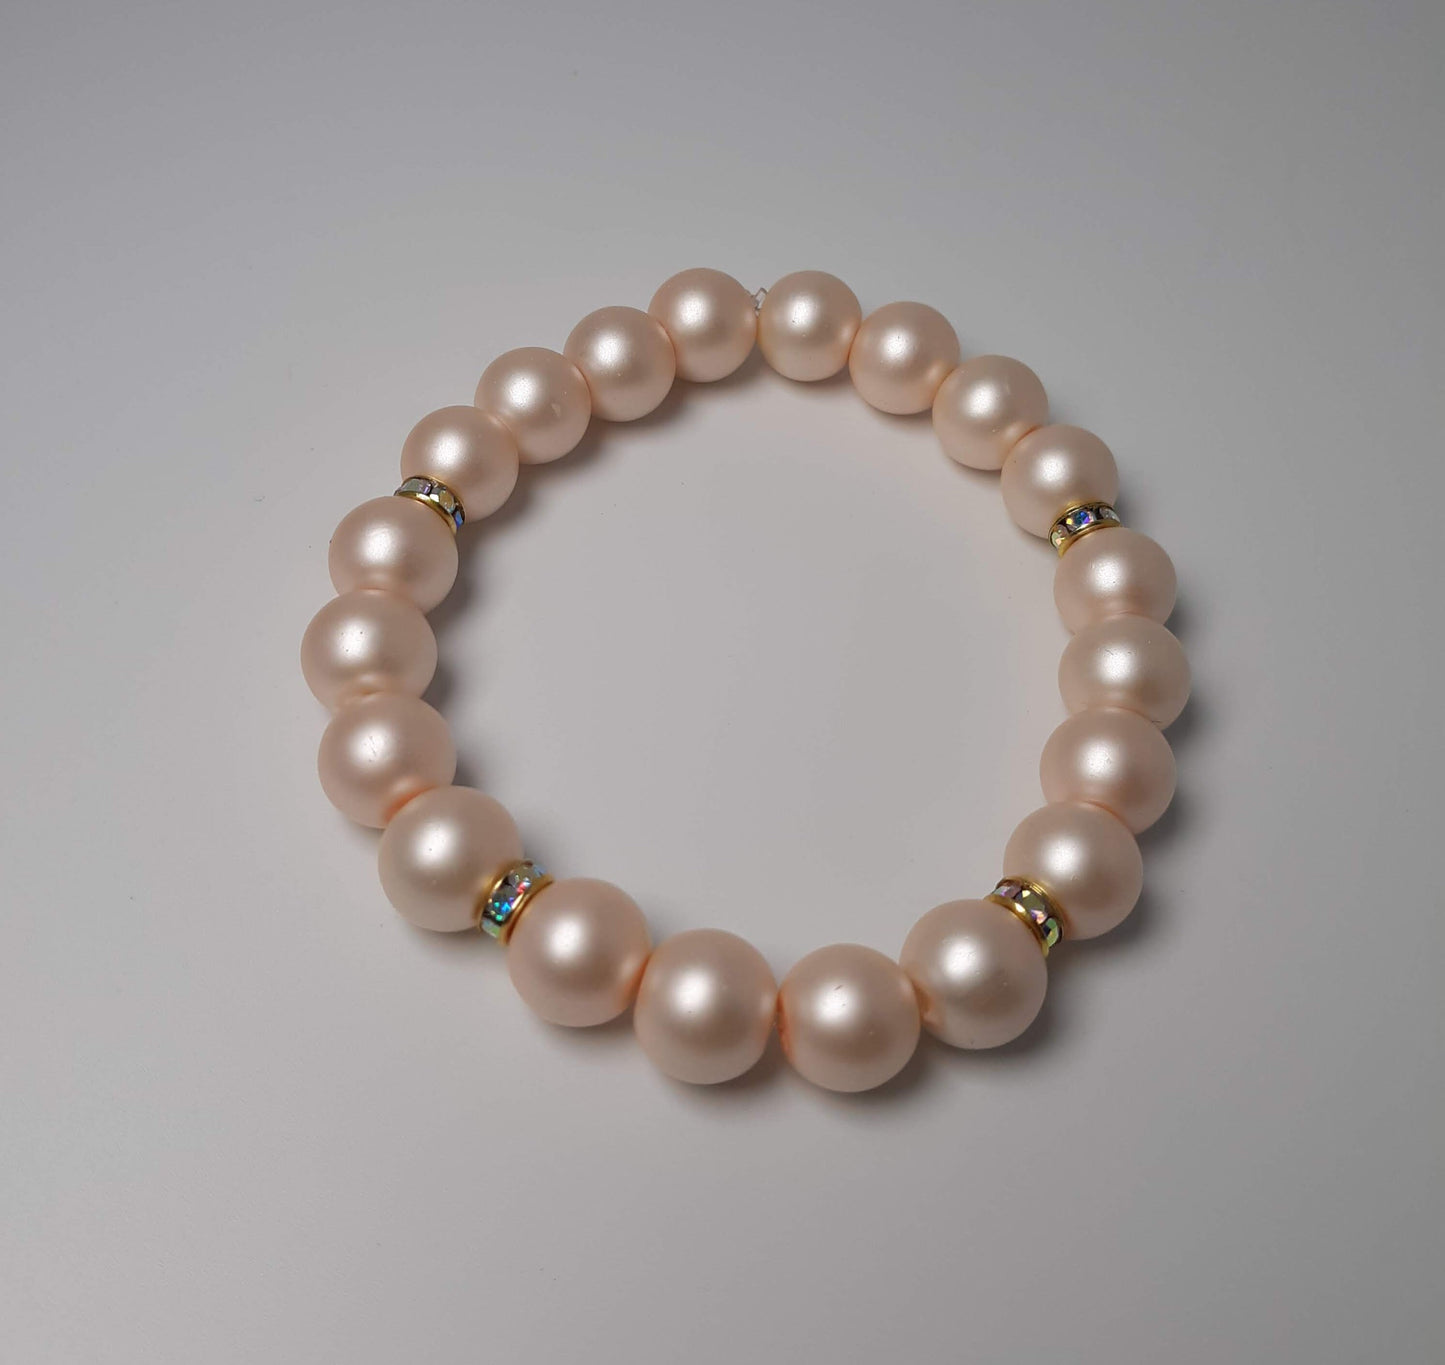 Cream Pearl Sparkly Beaded Bracelet Large Beads 8mm